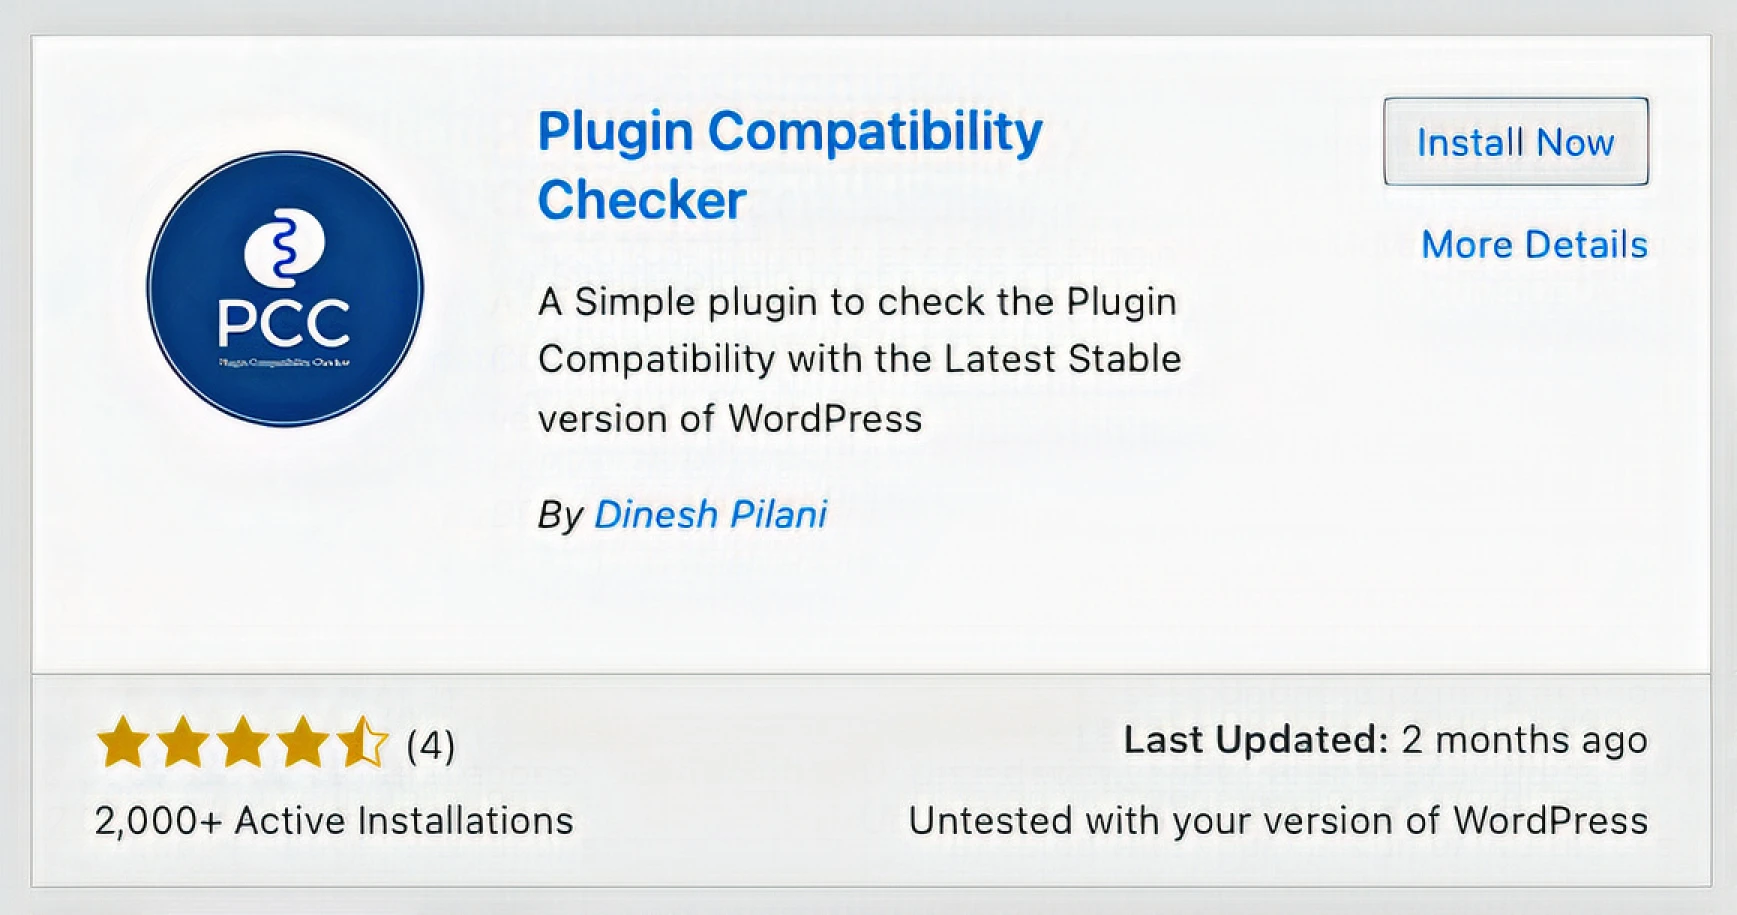 "Plugin Compatibility Checker" in focus with its description, button to install, last updated, and average rating of 4 stars.